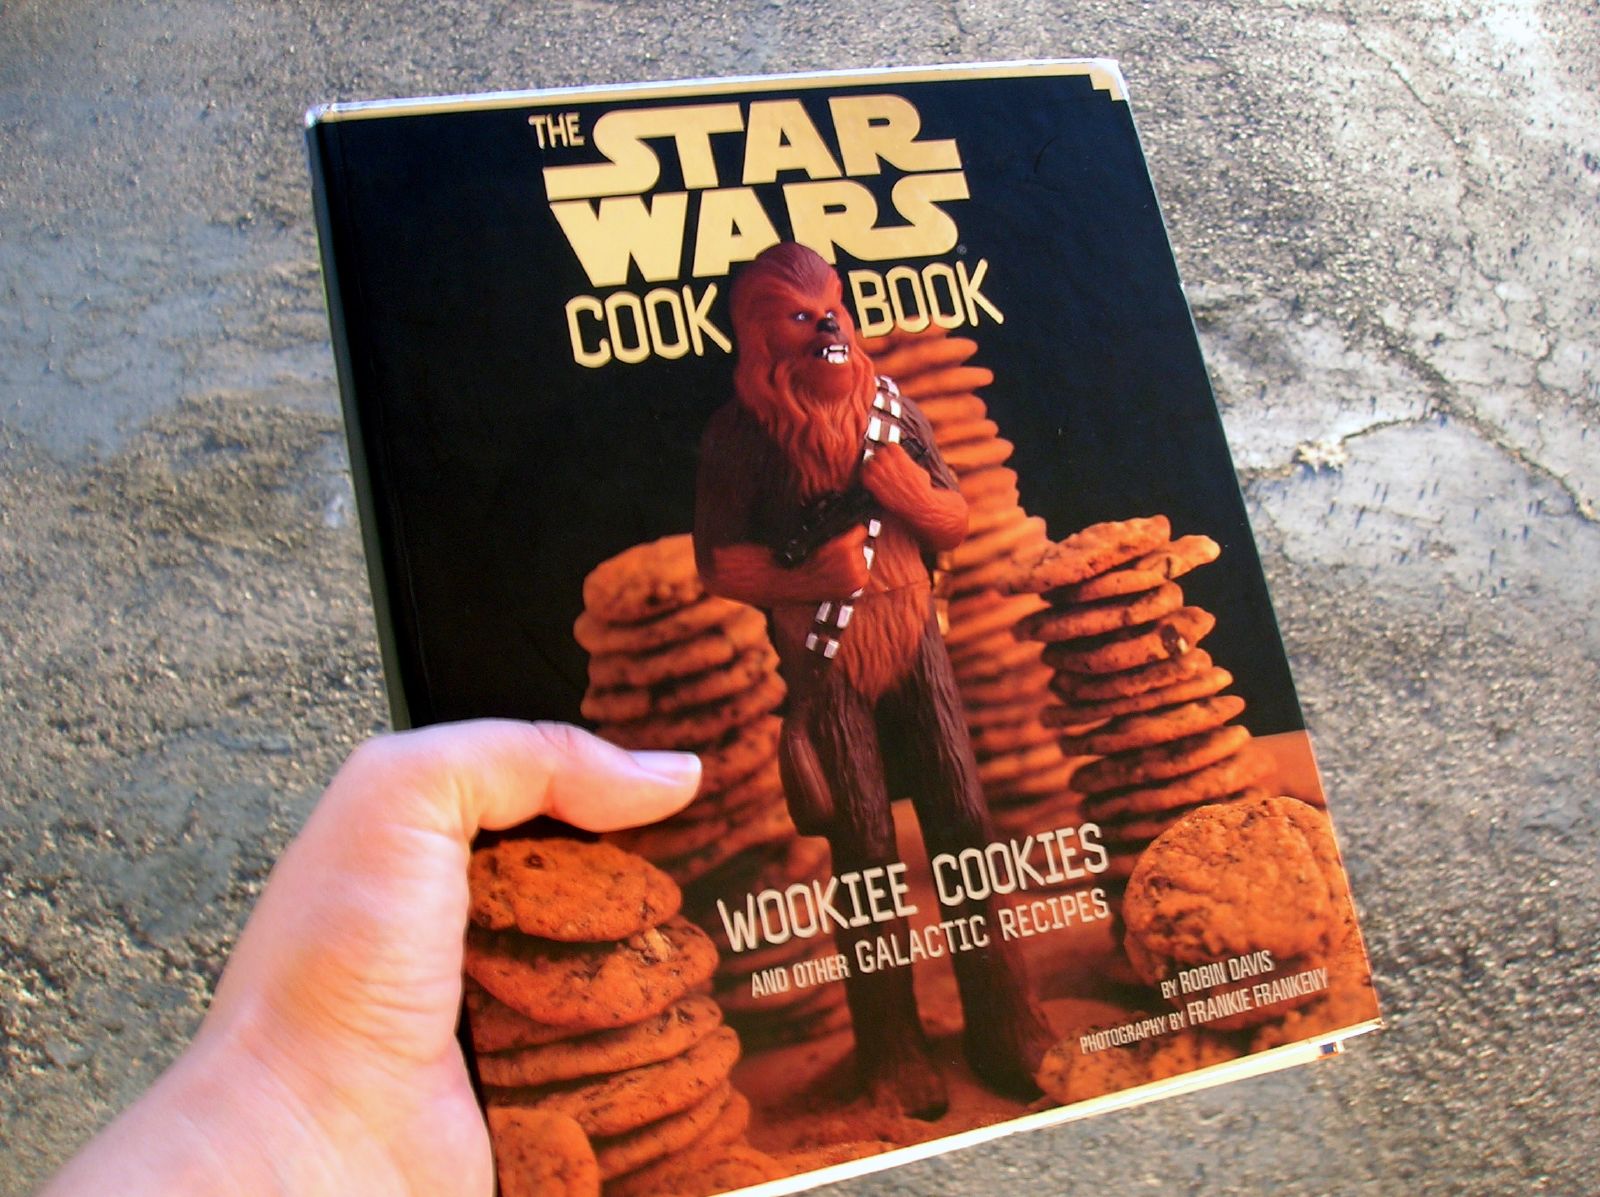 Photo of the cover of The Star Wars Cookbook: a pile of cookies with a Wookie in the front.